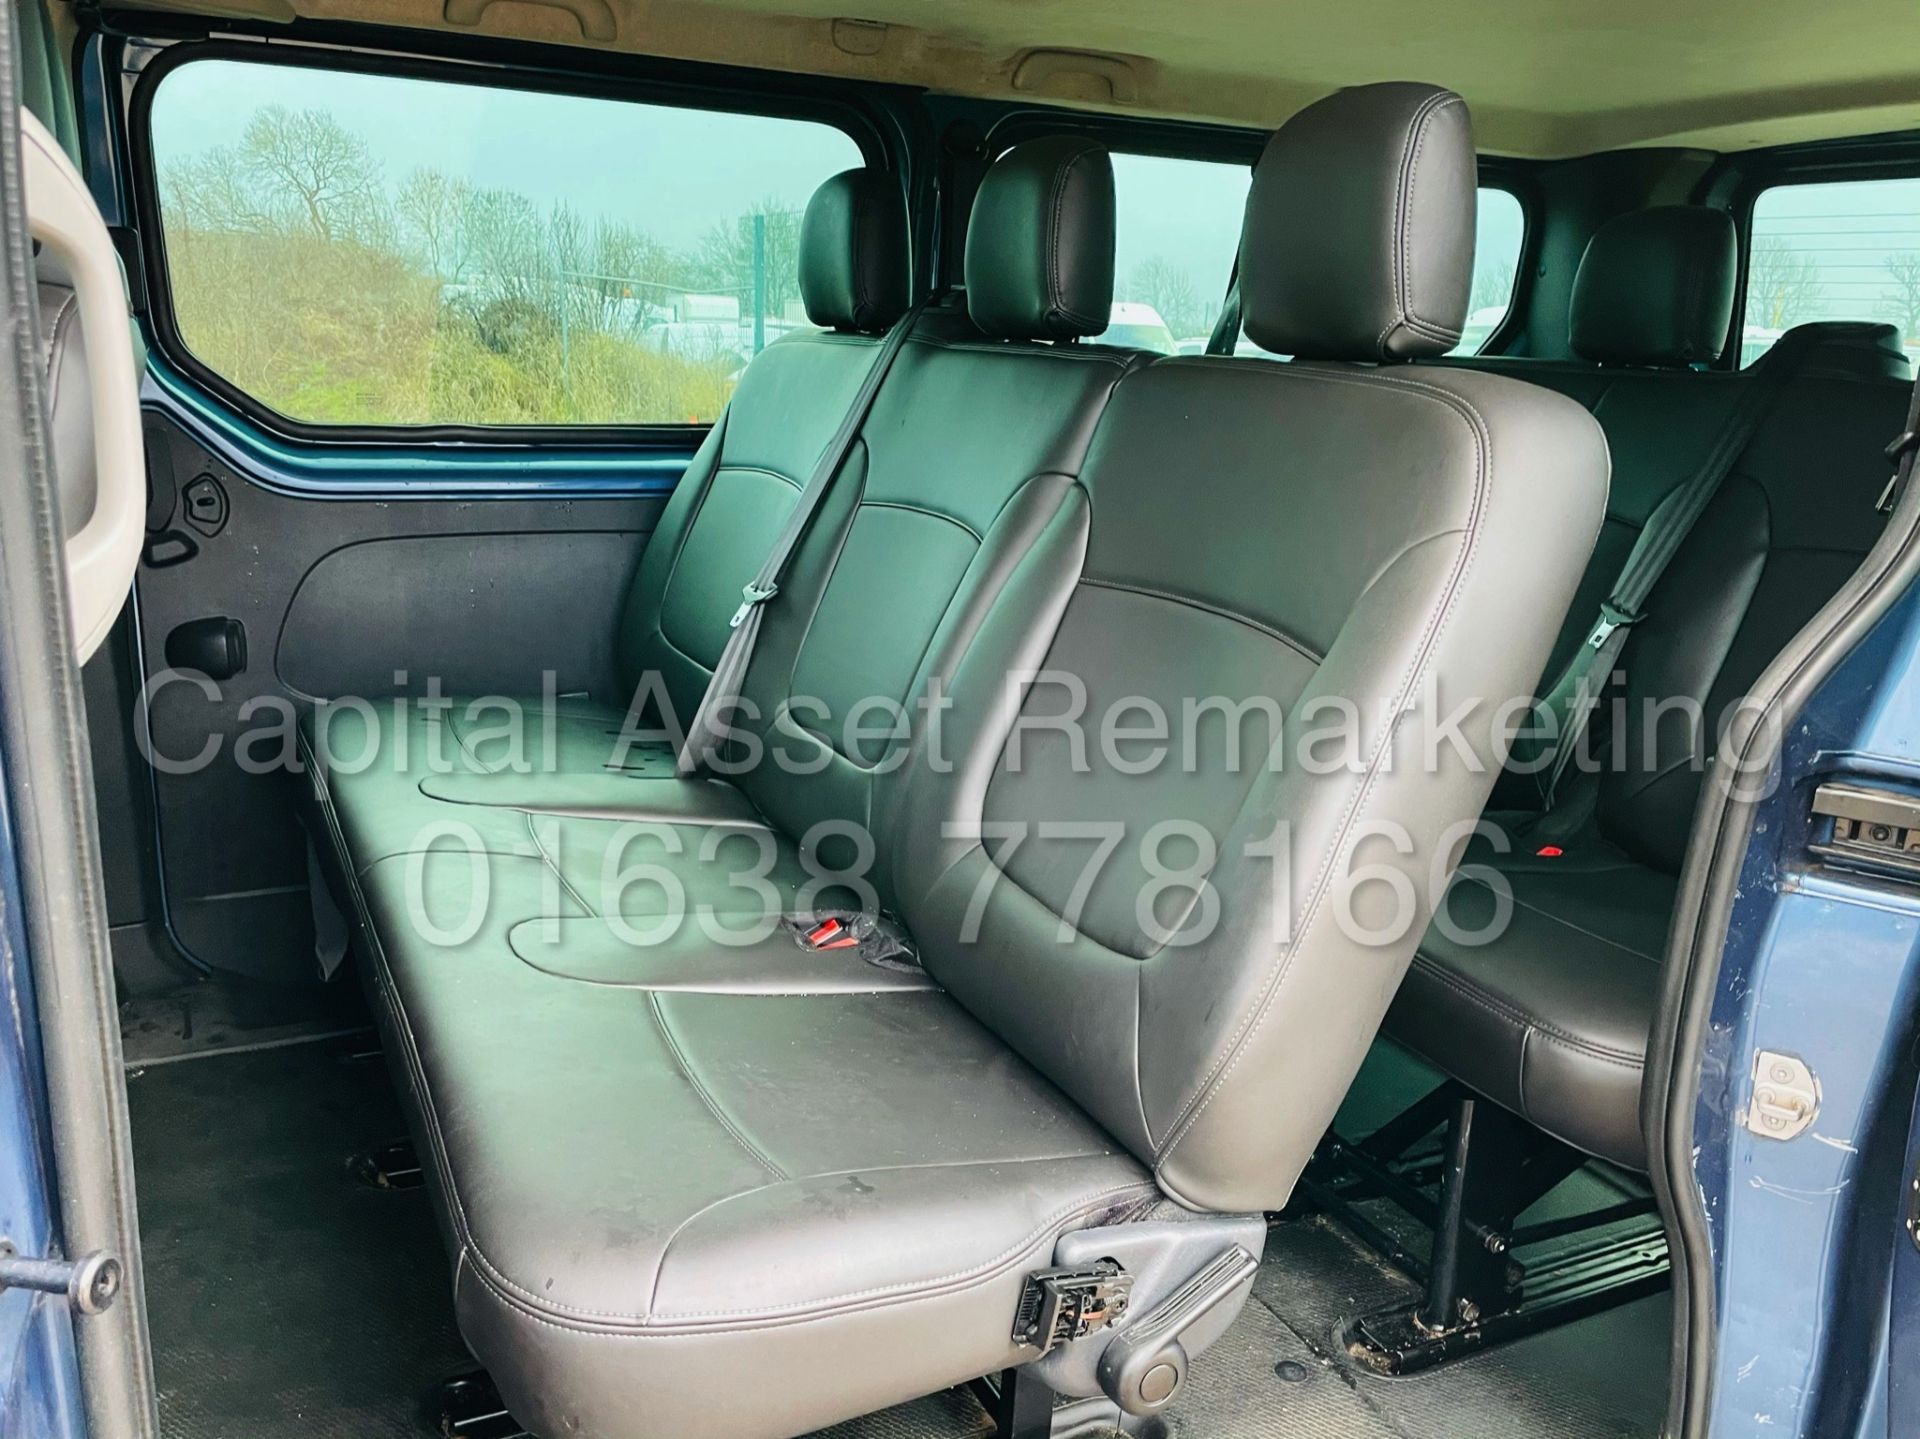 (ON SALE) RENAULT TRAFIC *LWB - 9 SEATER BUS* (2017 - EURO 6) '1.6 DCI - 6 SPEED' *AIR CON* (NO VAT) - Image 24 of 47